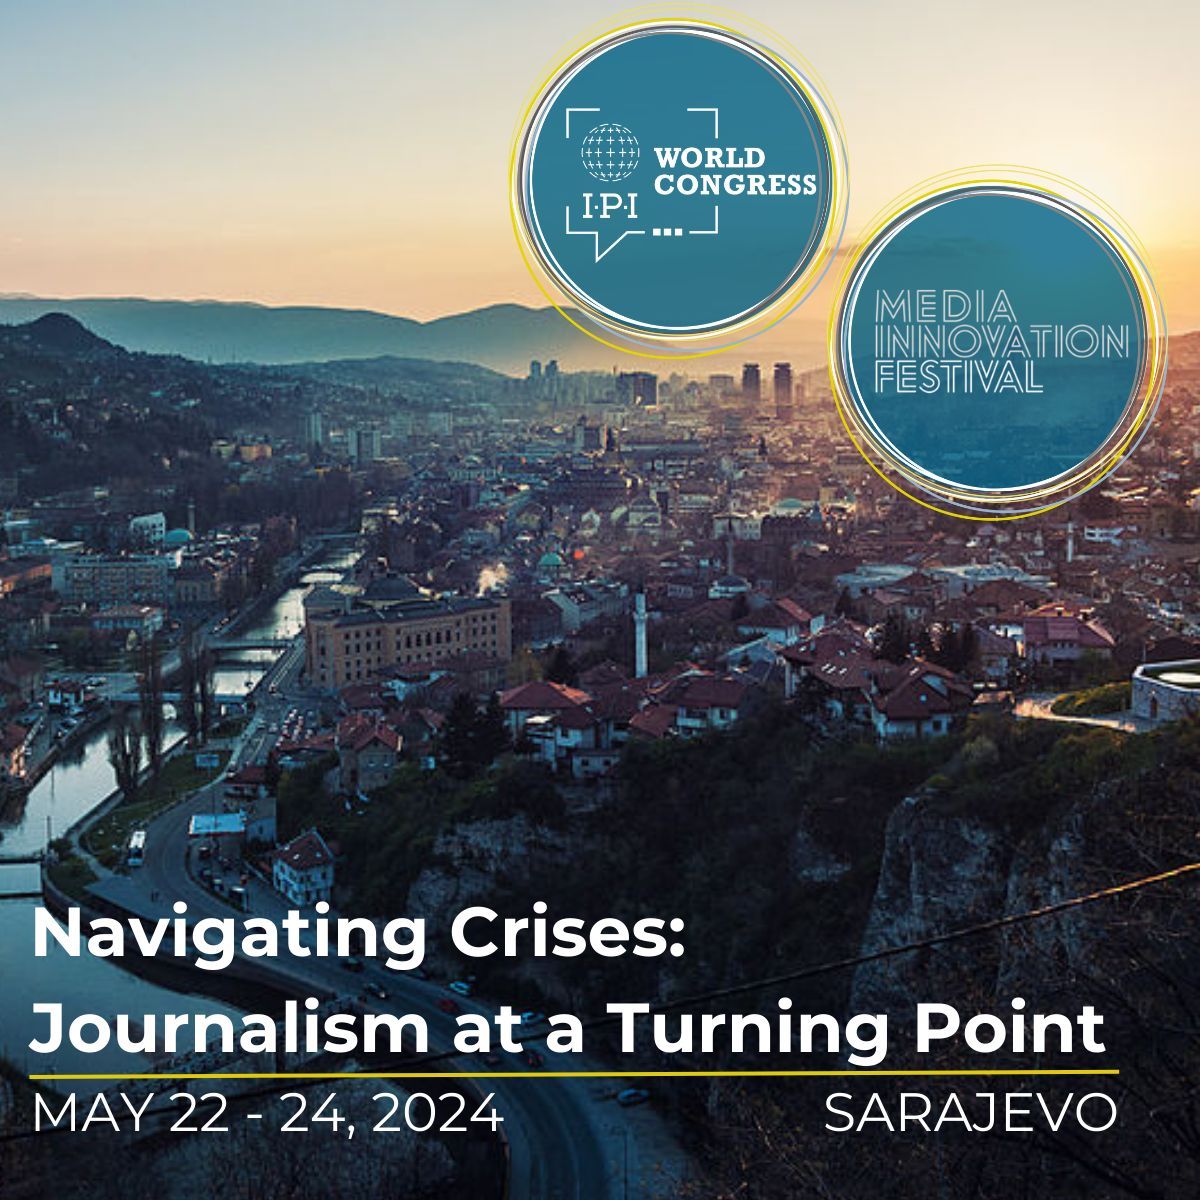 📅 22-24 May, Sarajevo. A free and critical press is vital to addressing the global challenges of our time. 

Join @globalfreemedia for #IPIWoCo 'Navigating Crises: Journalism at a Turning Point” where leading journalists will share their ideas 👉 buff.ly/3Qfu4rT